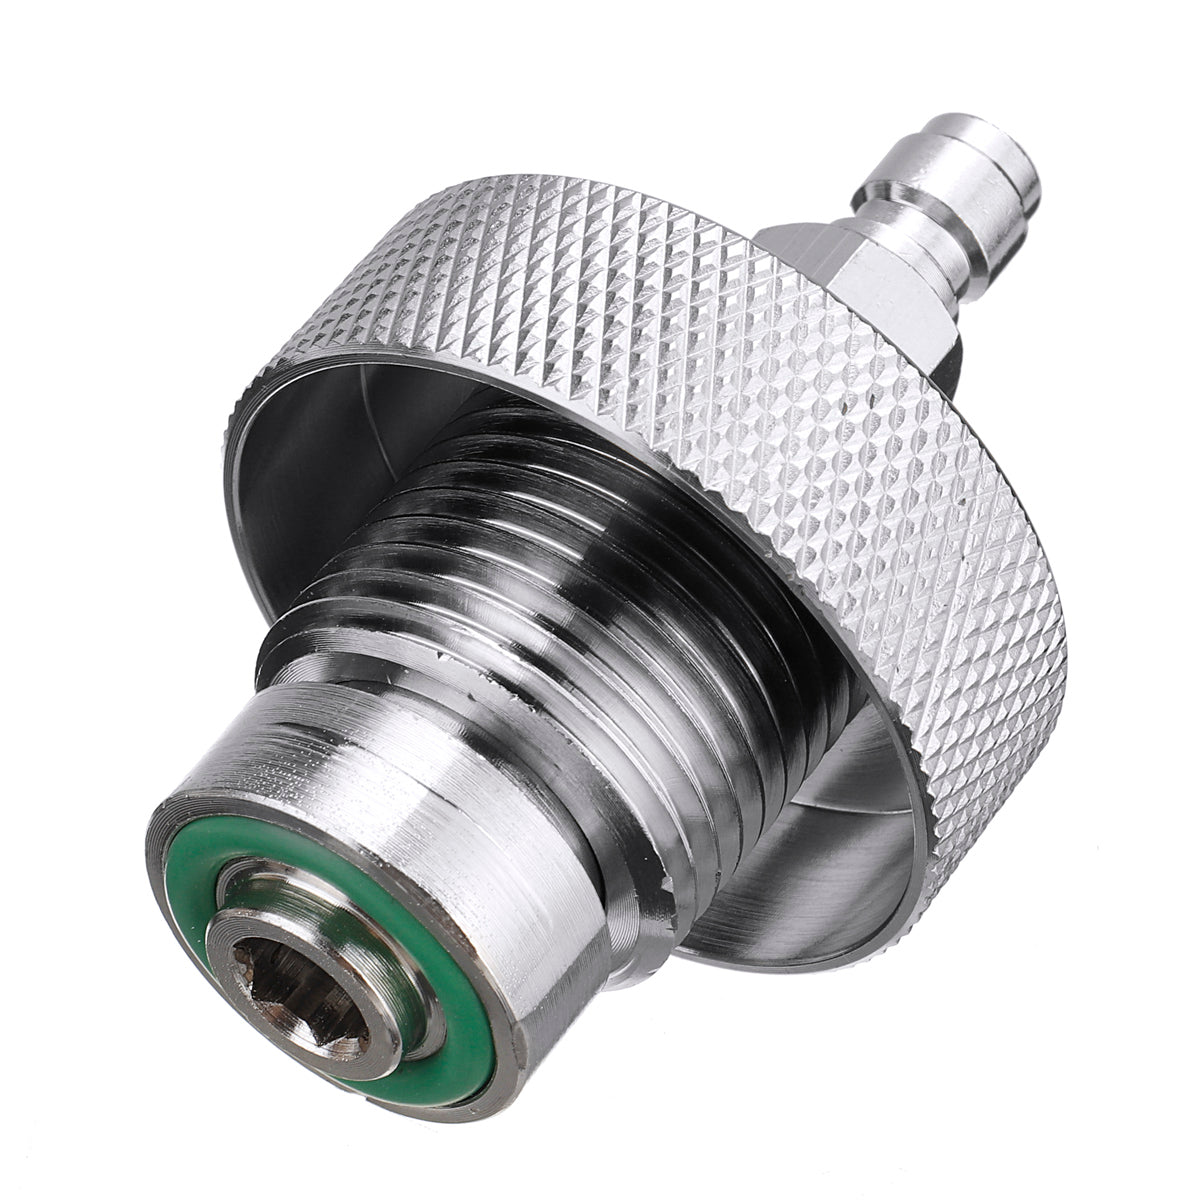 Lavender Male/Female Stainless Steel 300Bar Din Valve Filling Adapter For Paintball Air Tool Air